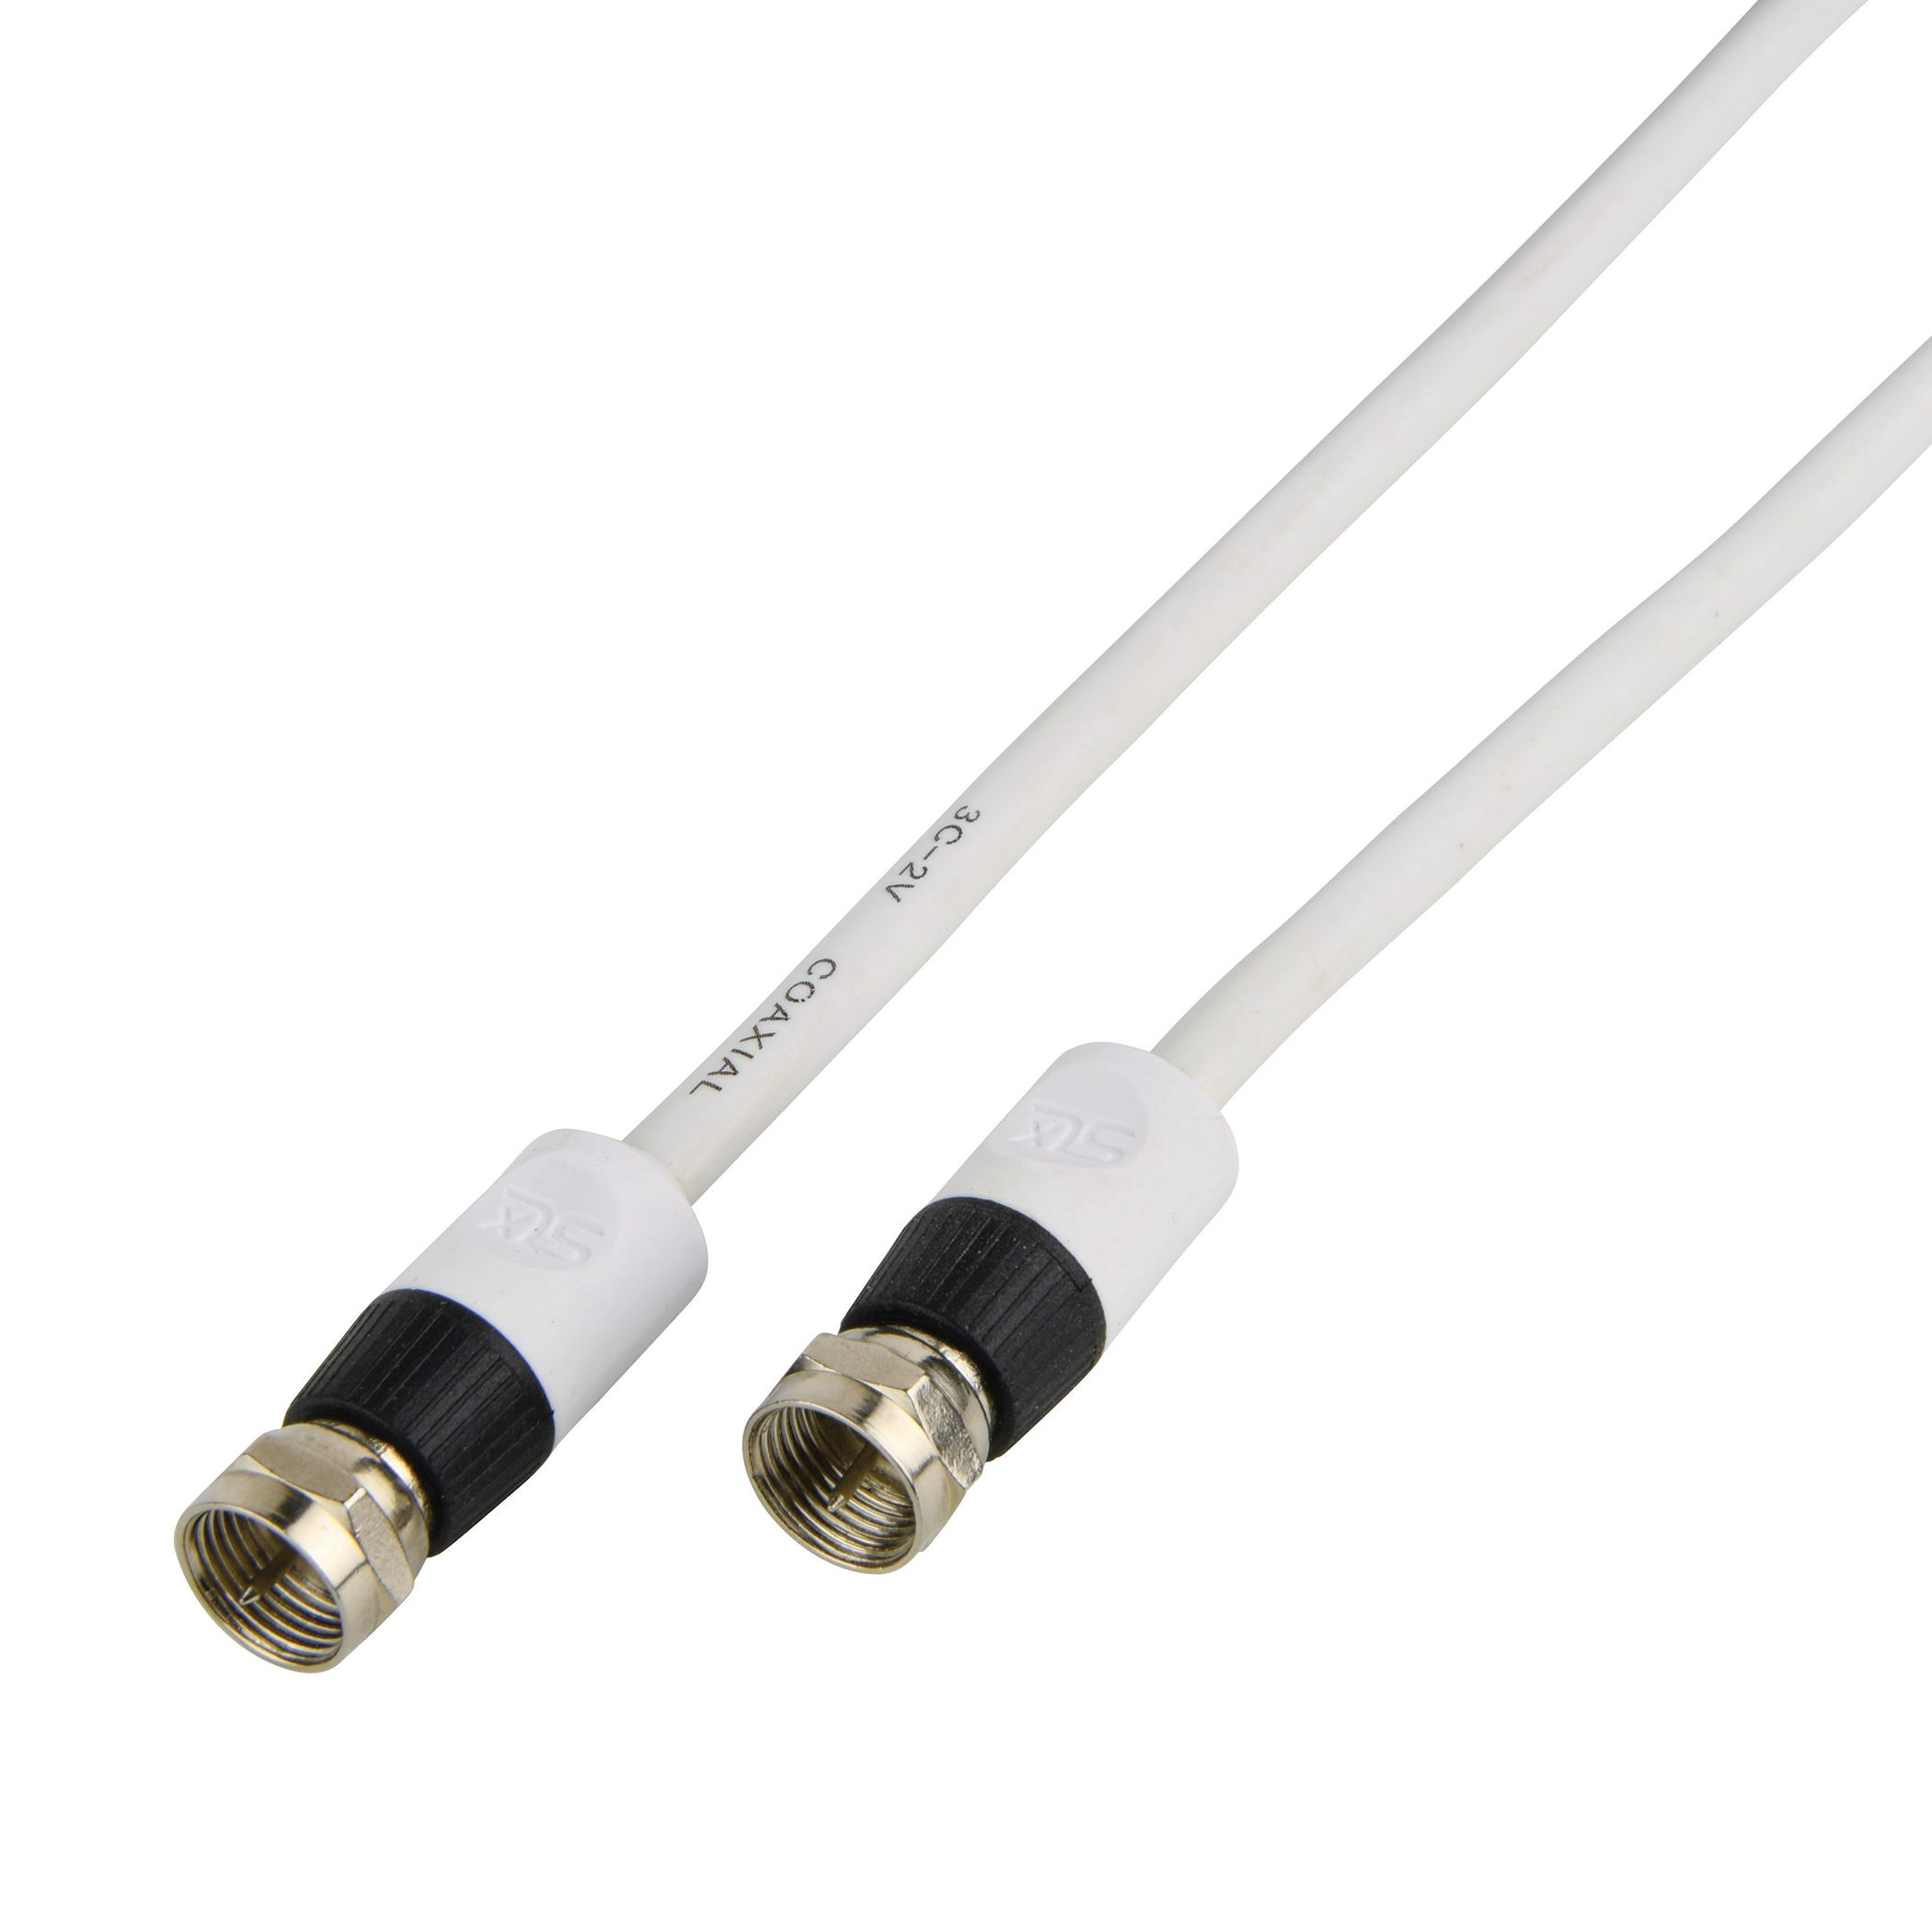 Antenna cable TV-Video M/F white angled 10m for Antenna & Satellite –  iBlevel